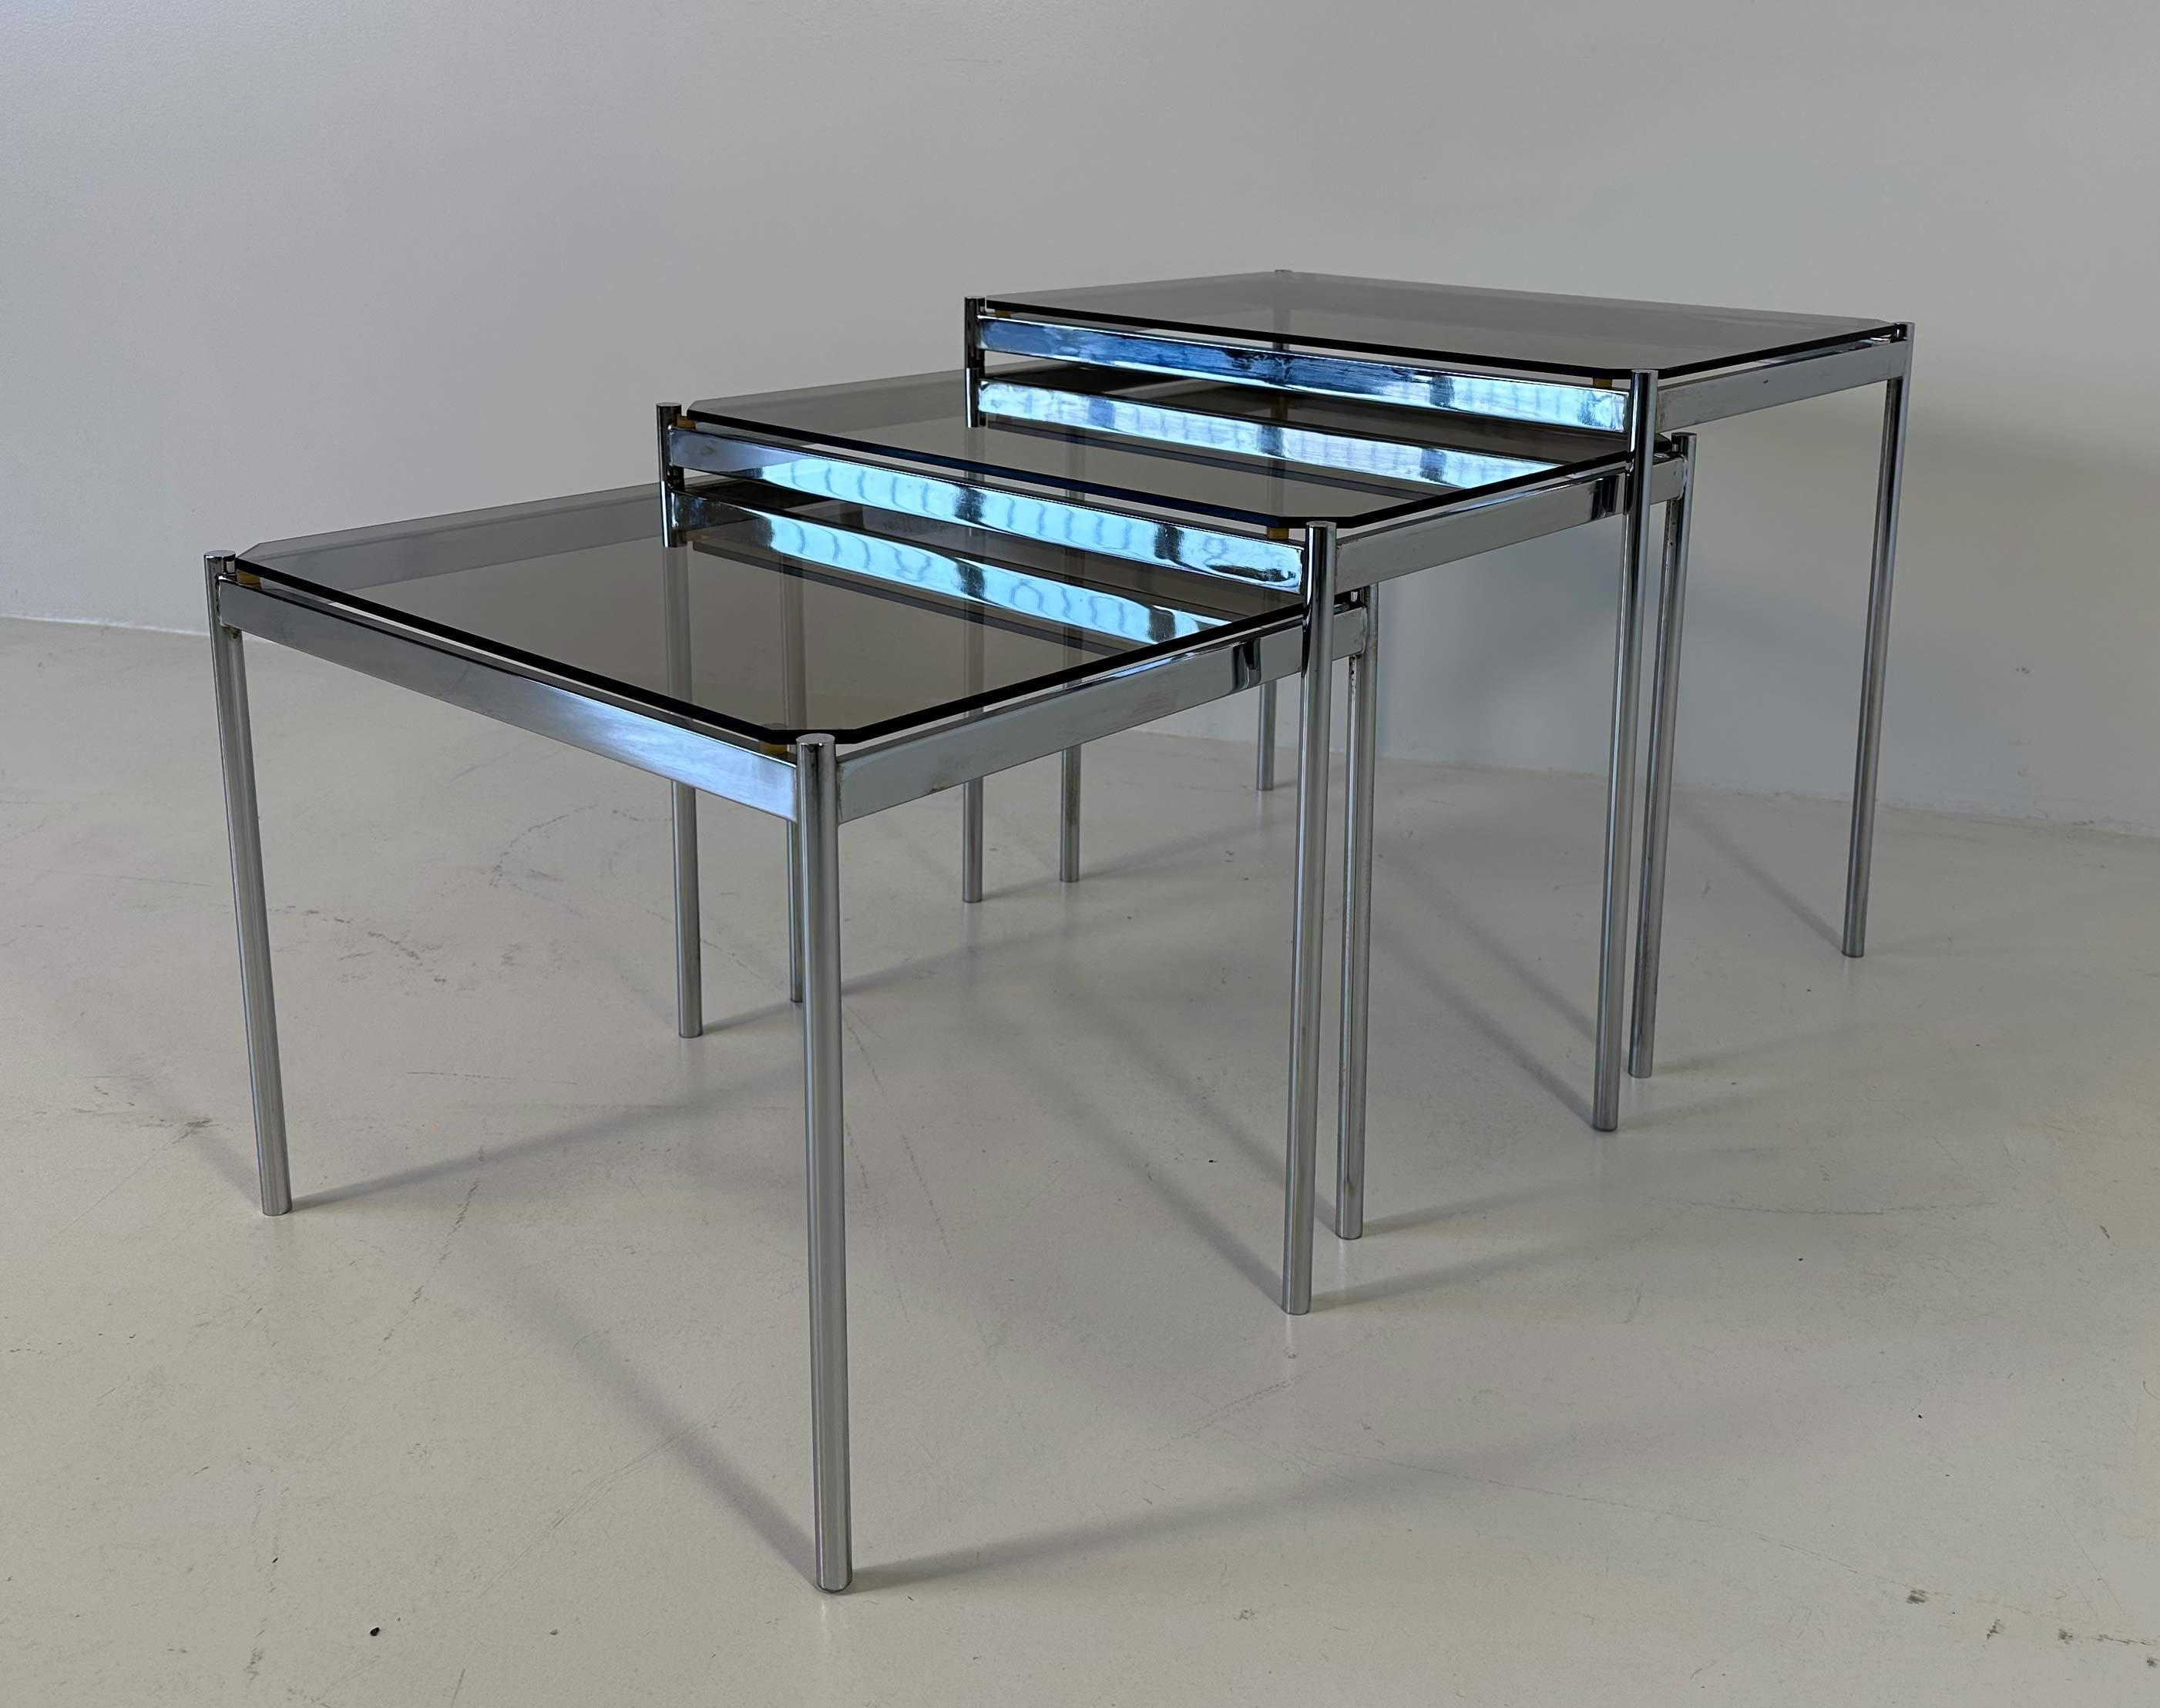 This set of three Mid-Century Modern coffee tables was produced in Italy in the 1970s. 
They are in smoked glass and chromed metal.
In very good vintage conditions.
Measurements: 
largest: 55 cm x 38 cm H 46 cm
medium: 51 cm x 38 cm H 42